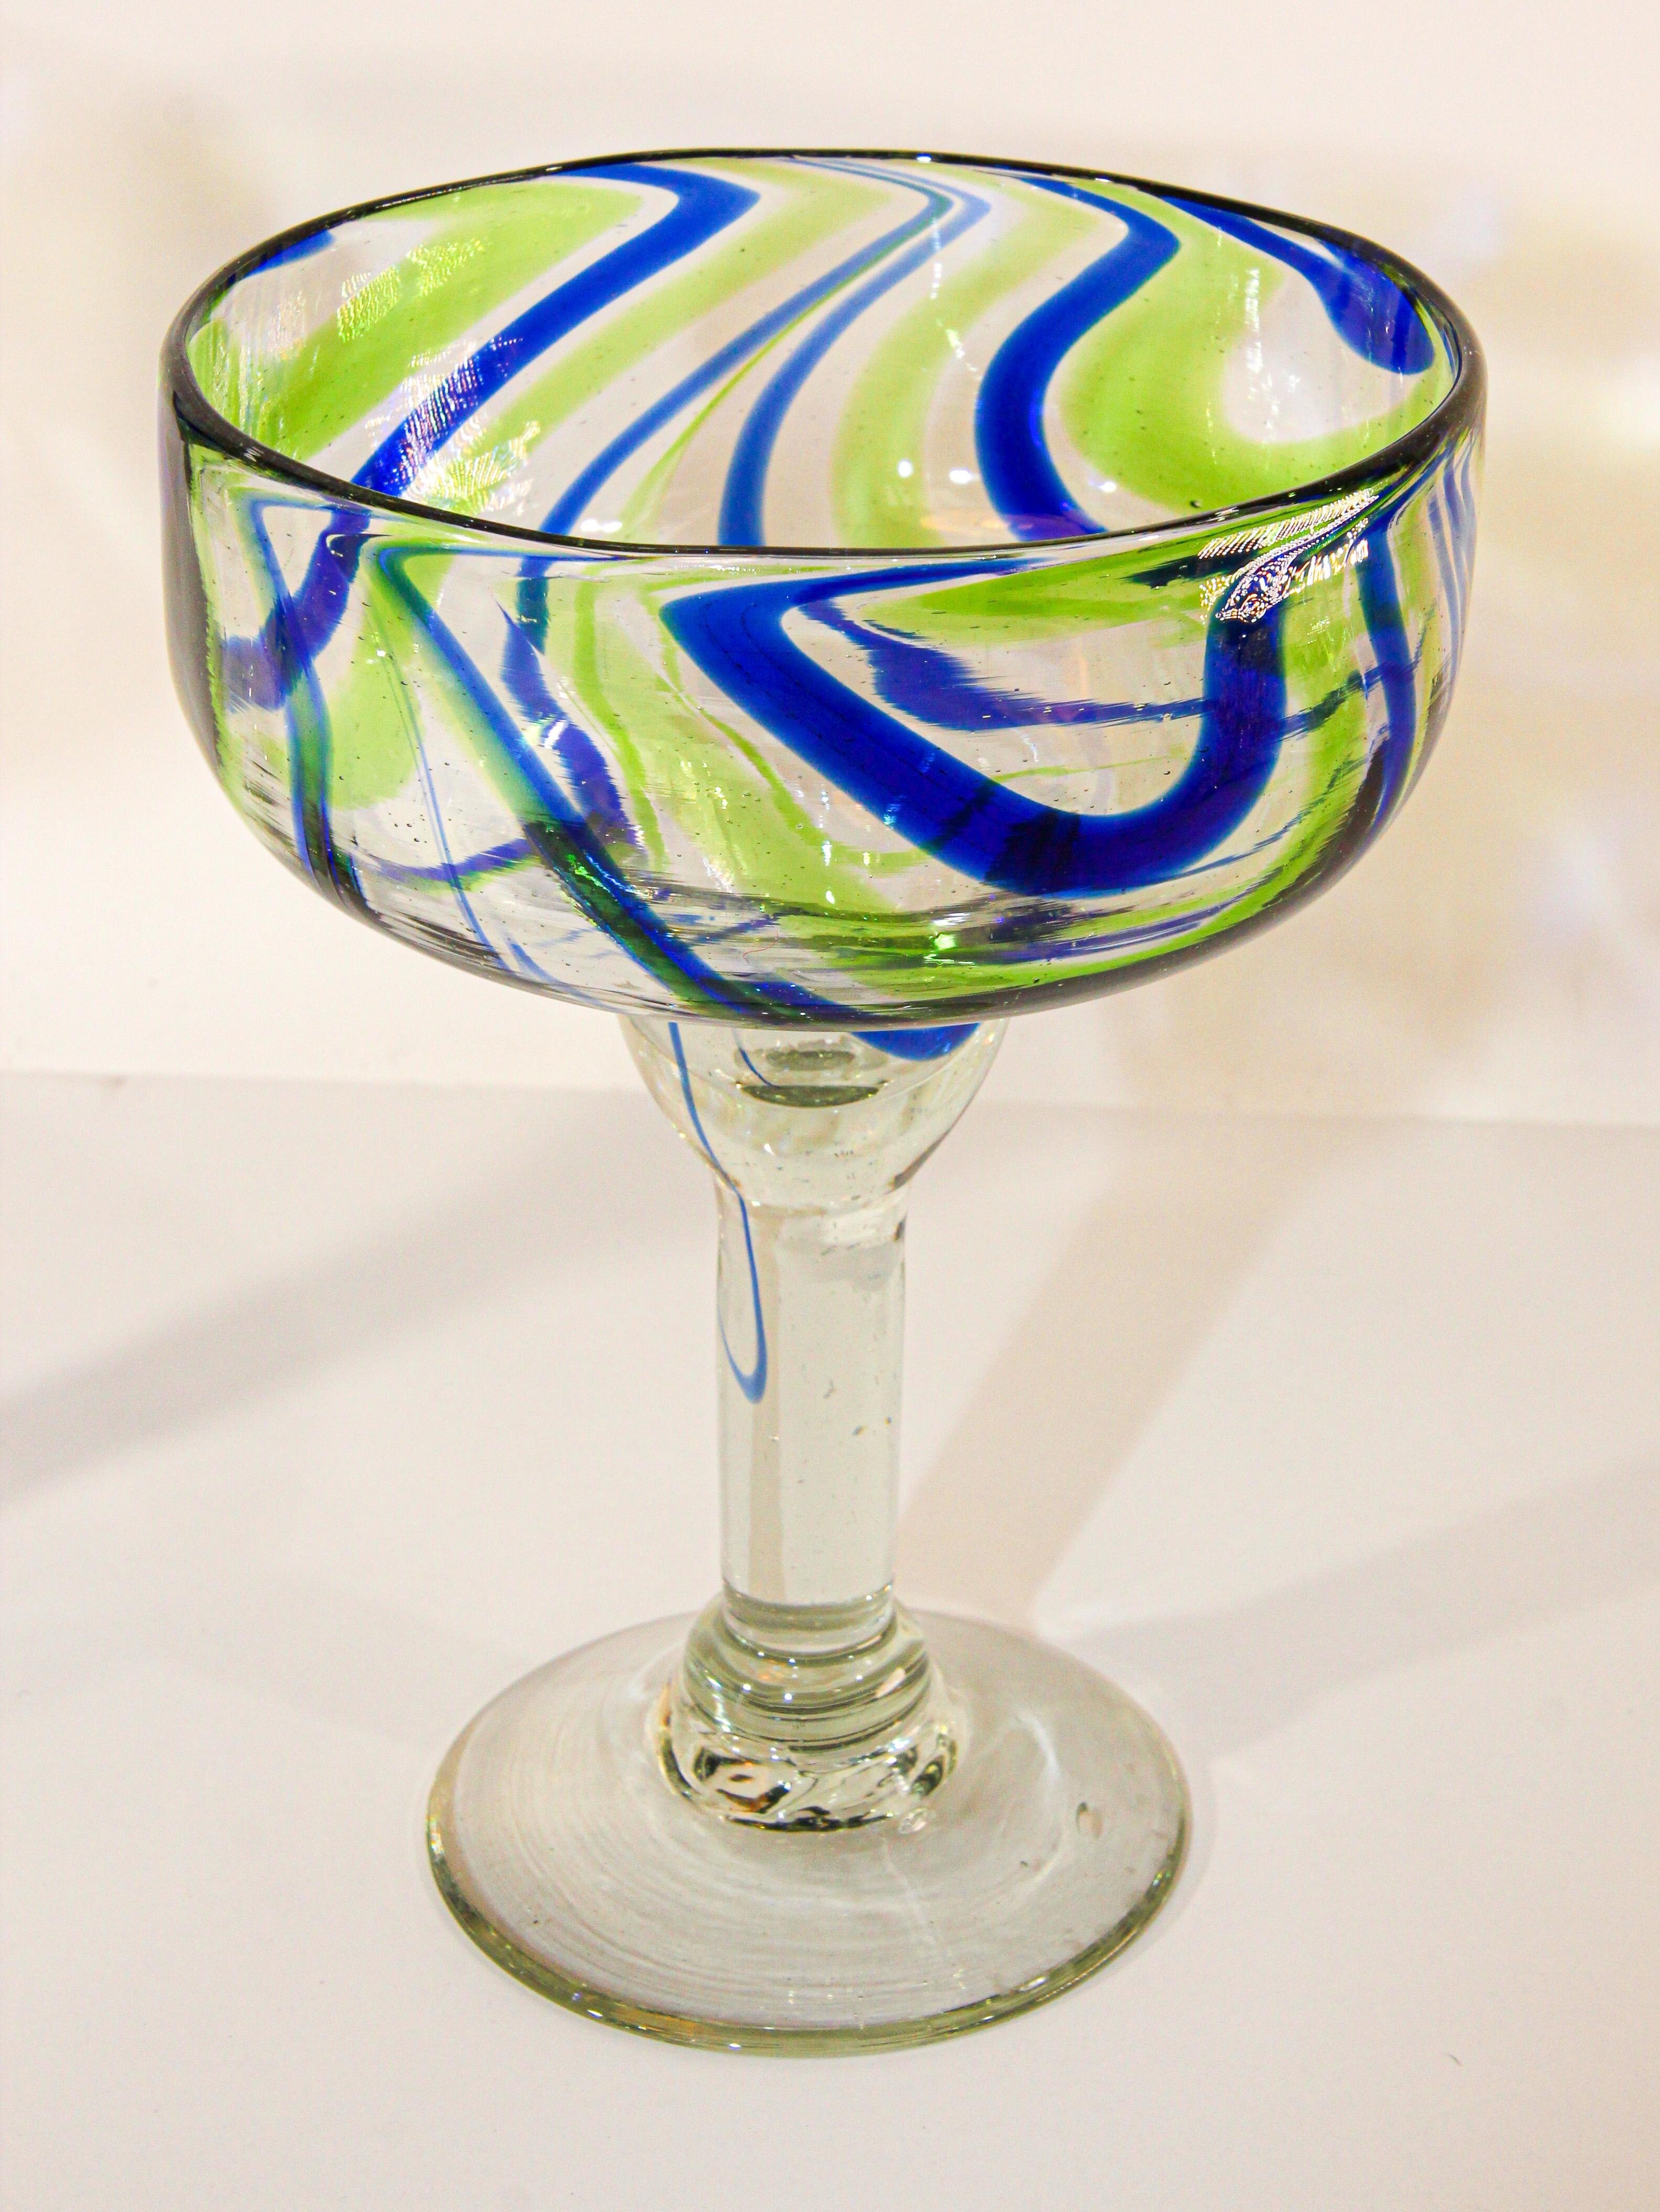 Post-Modern Vintage Murano Blue and Green Martini Glasses Set of 2